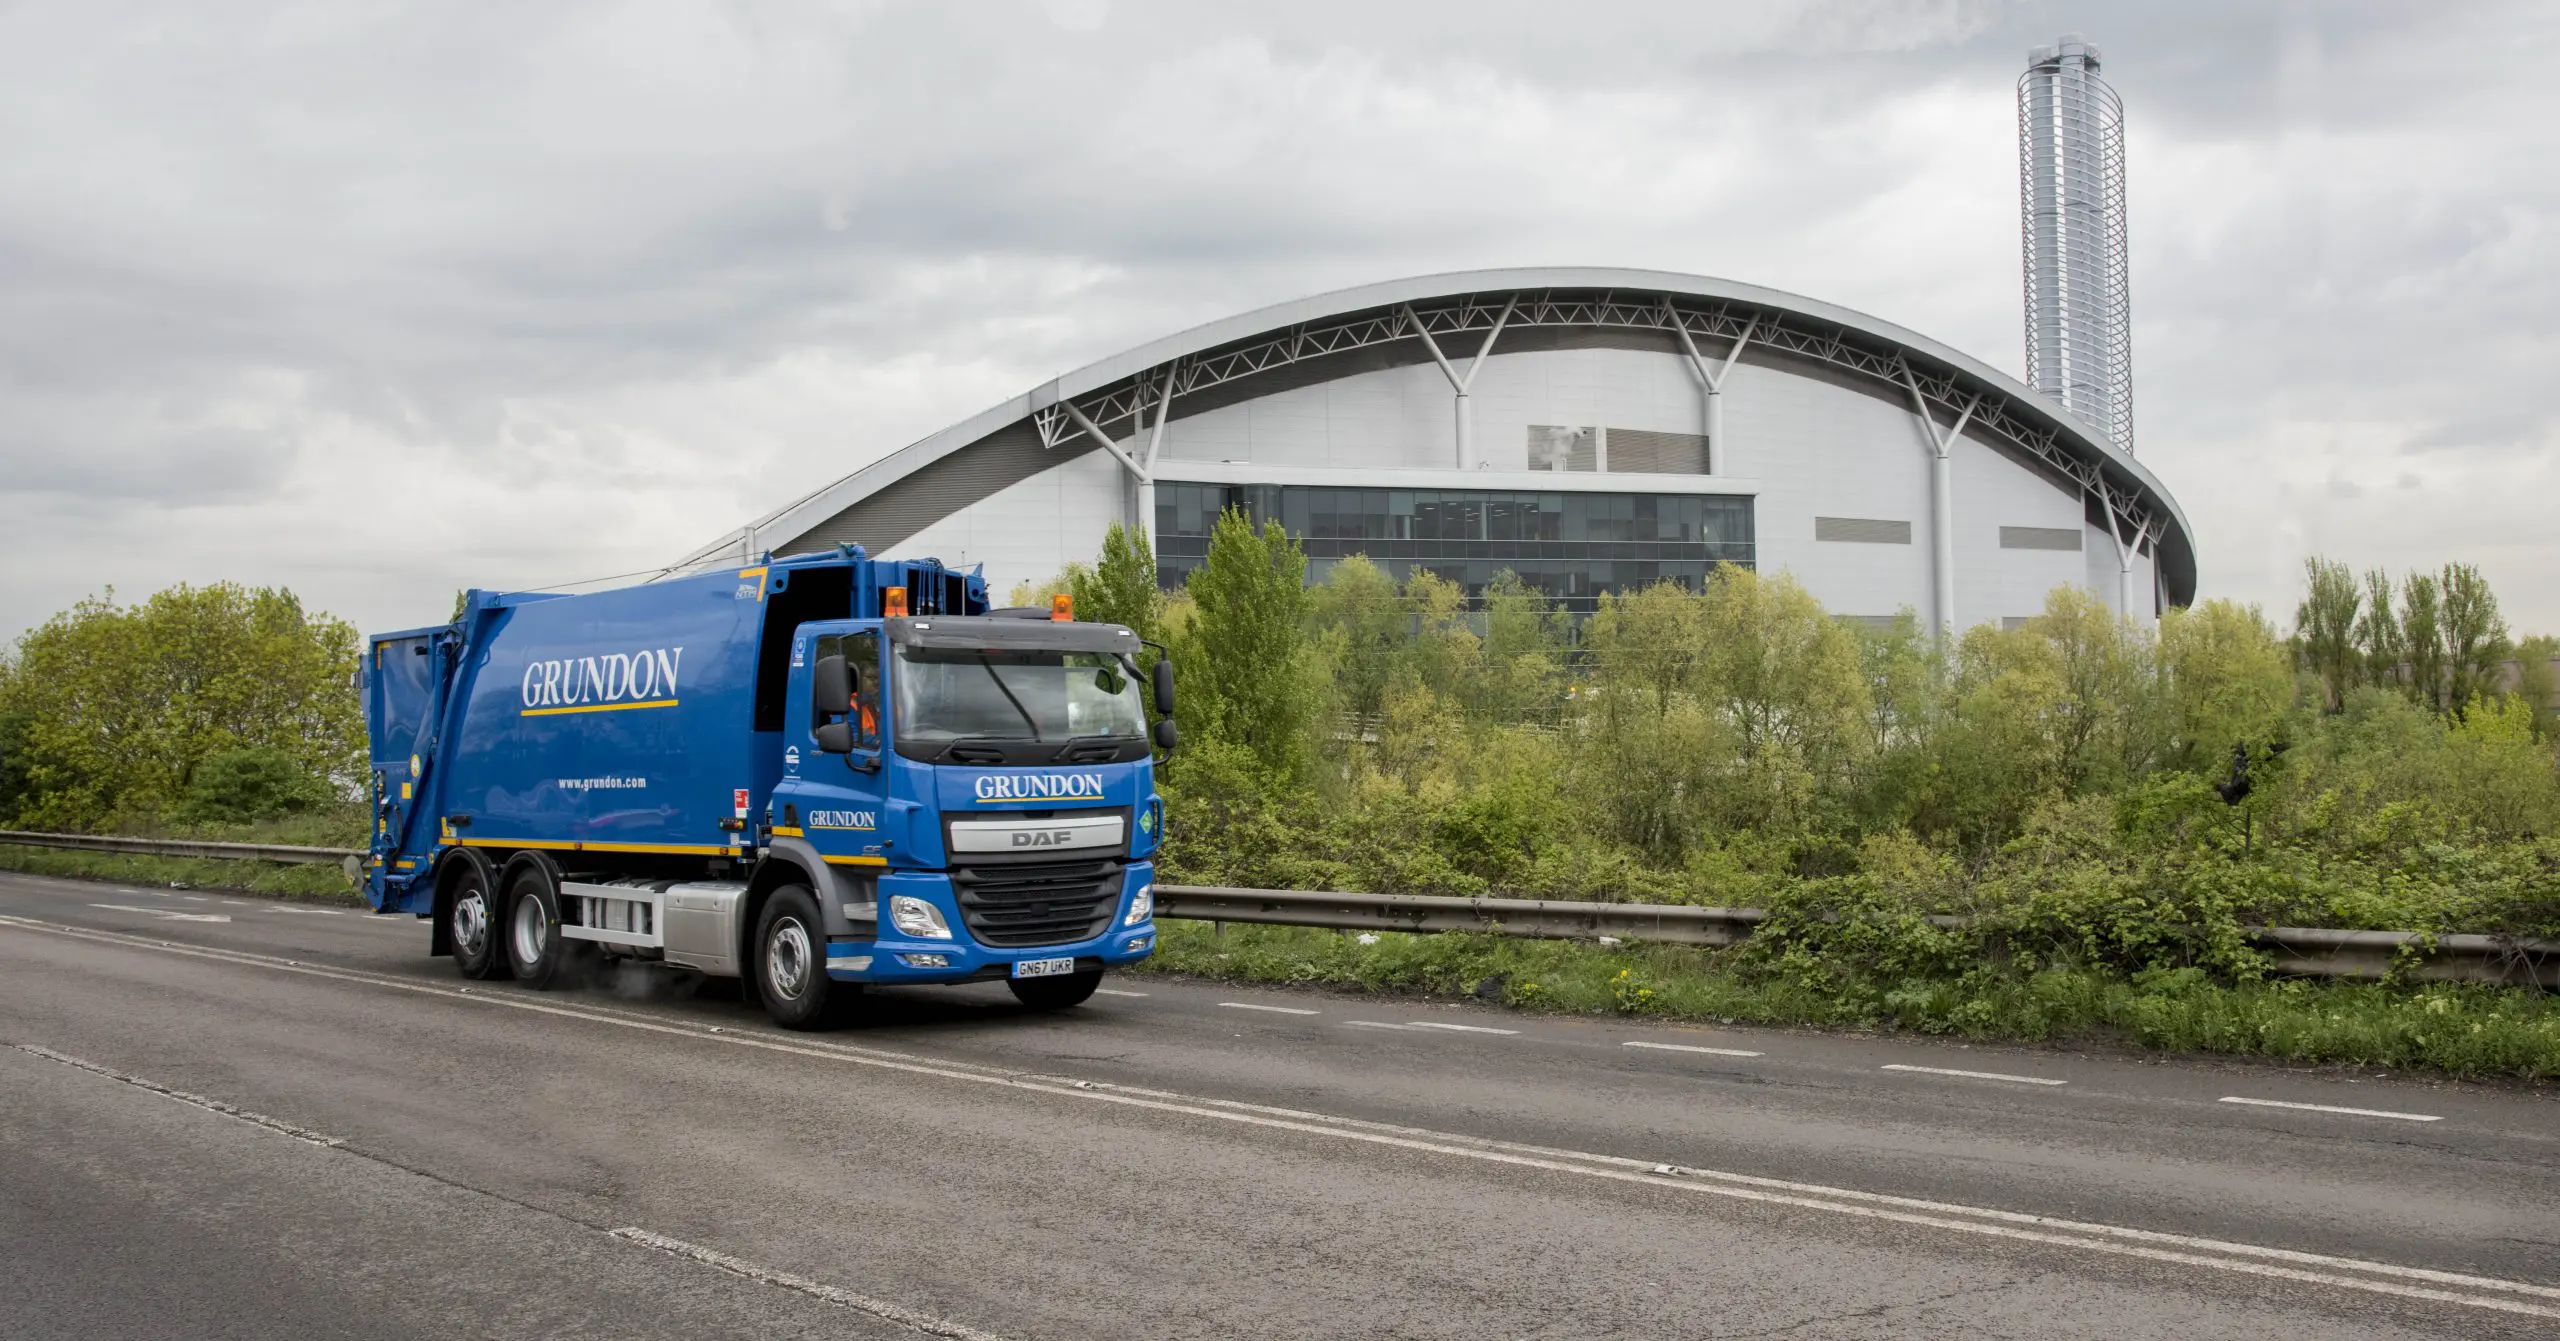 Grundon's new ultra-low emission hydrogen diesel dual-fuel waste collection vehicle